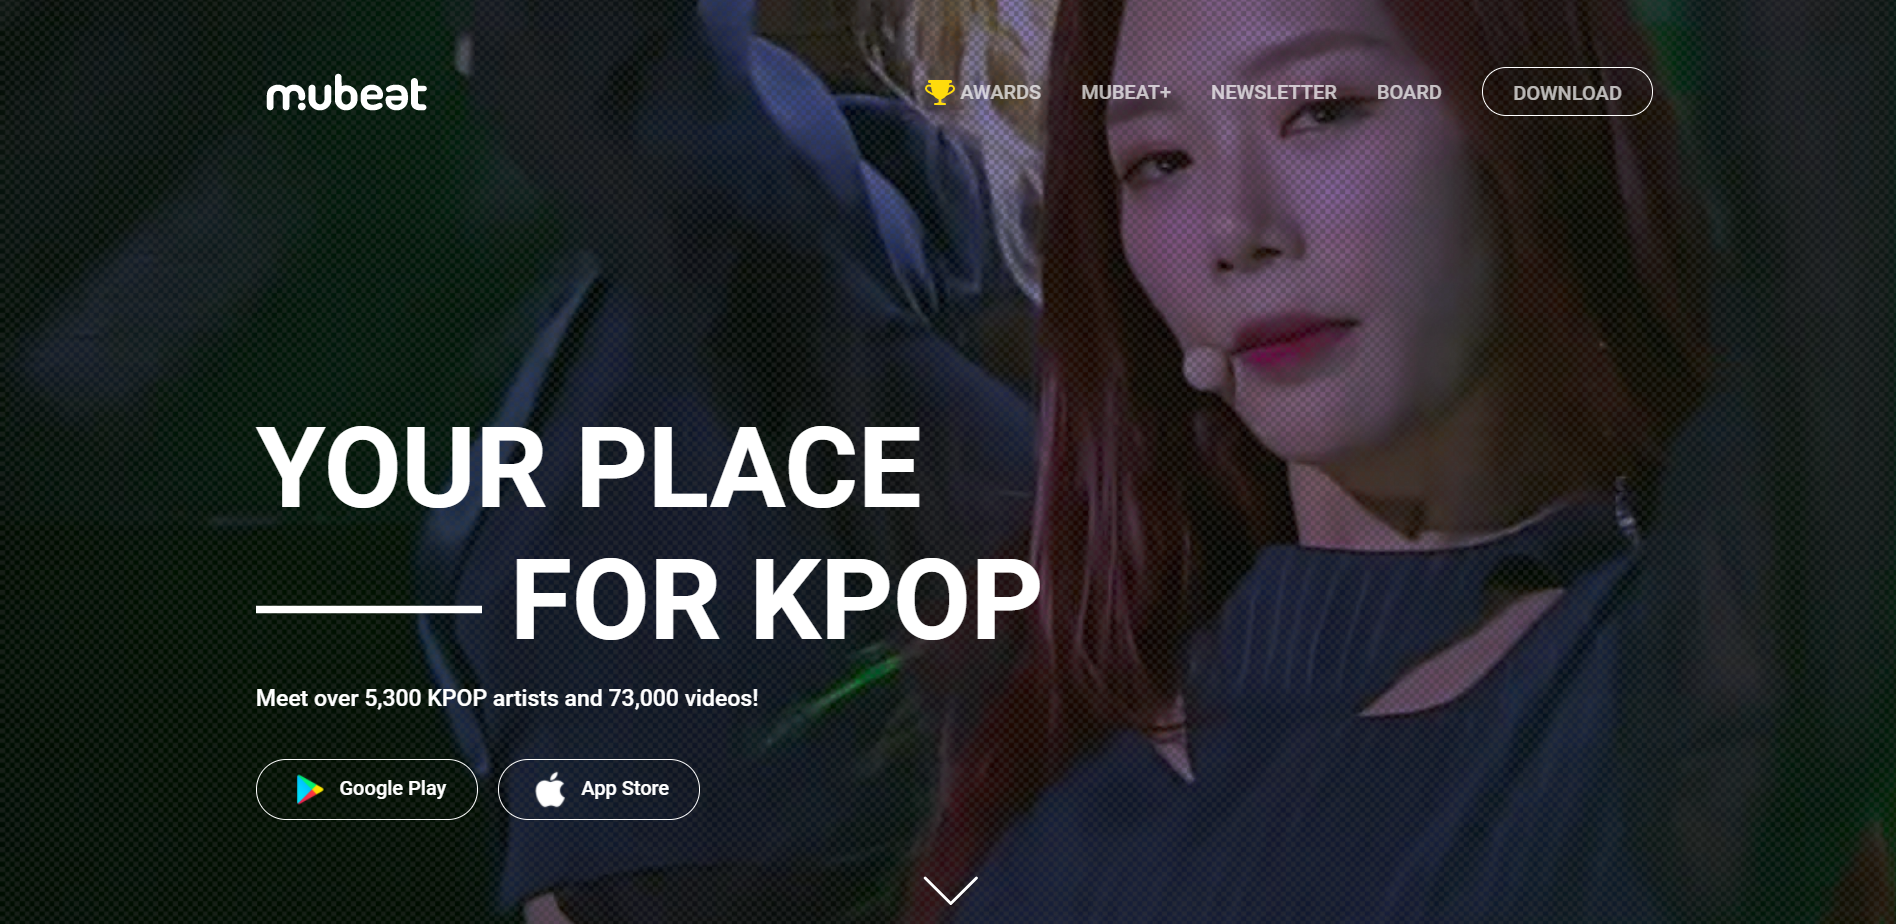 kpop streaming services - mubeat